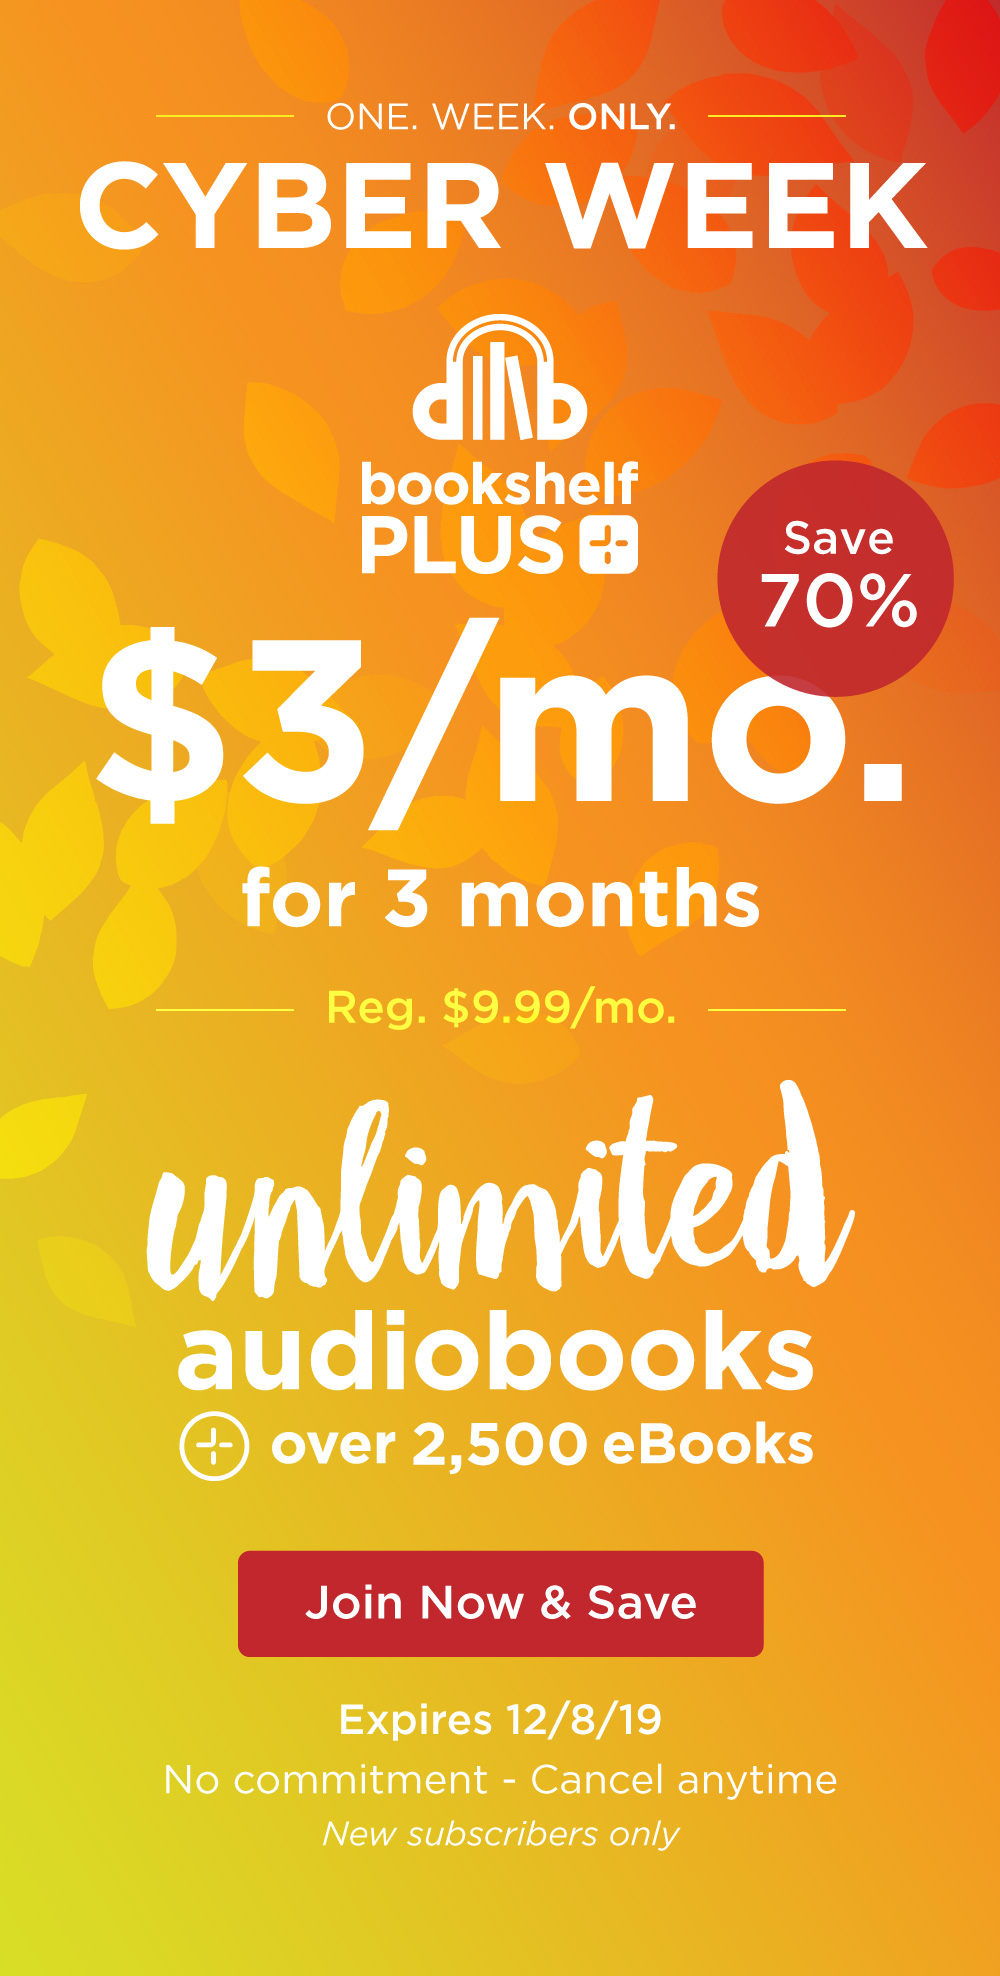 Active - Get $3/mo for 3 months of PLUS+